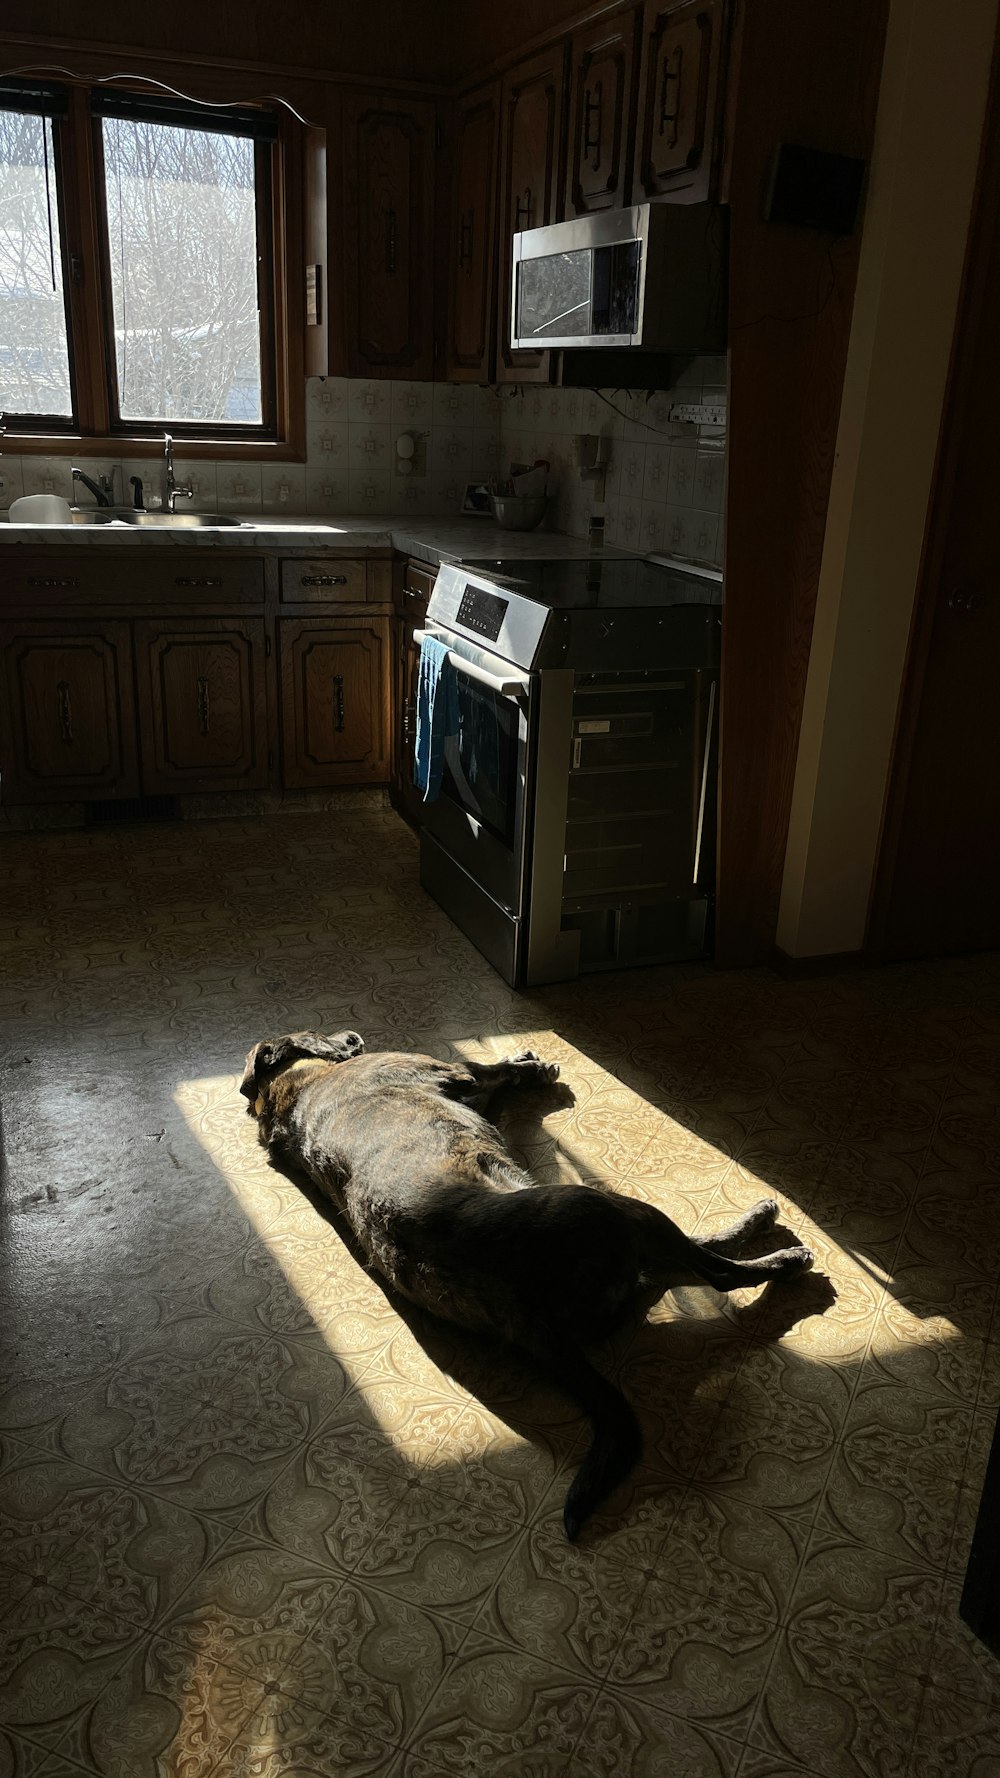 a dog laying on the floor in a kitchen